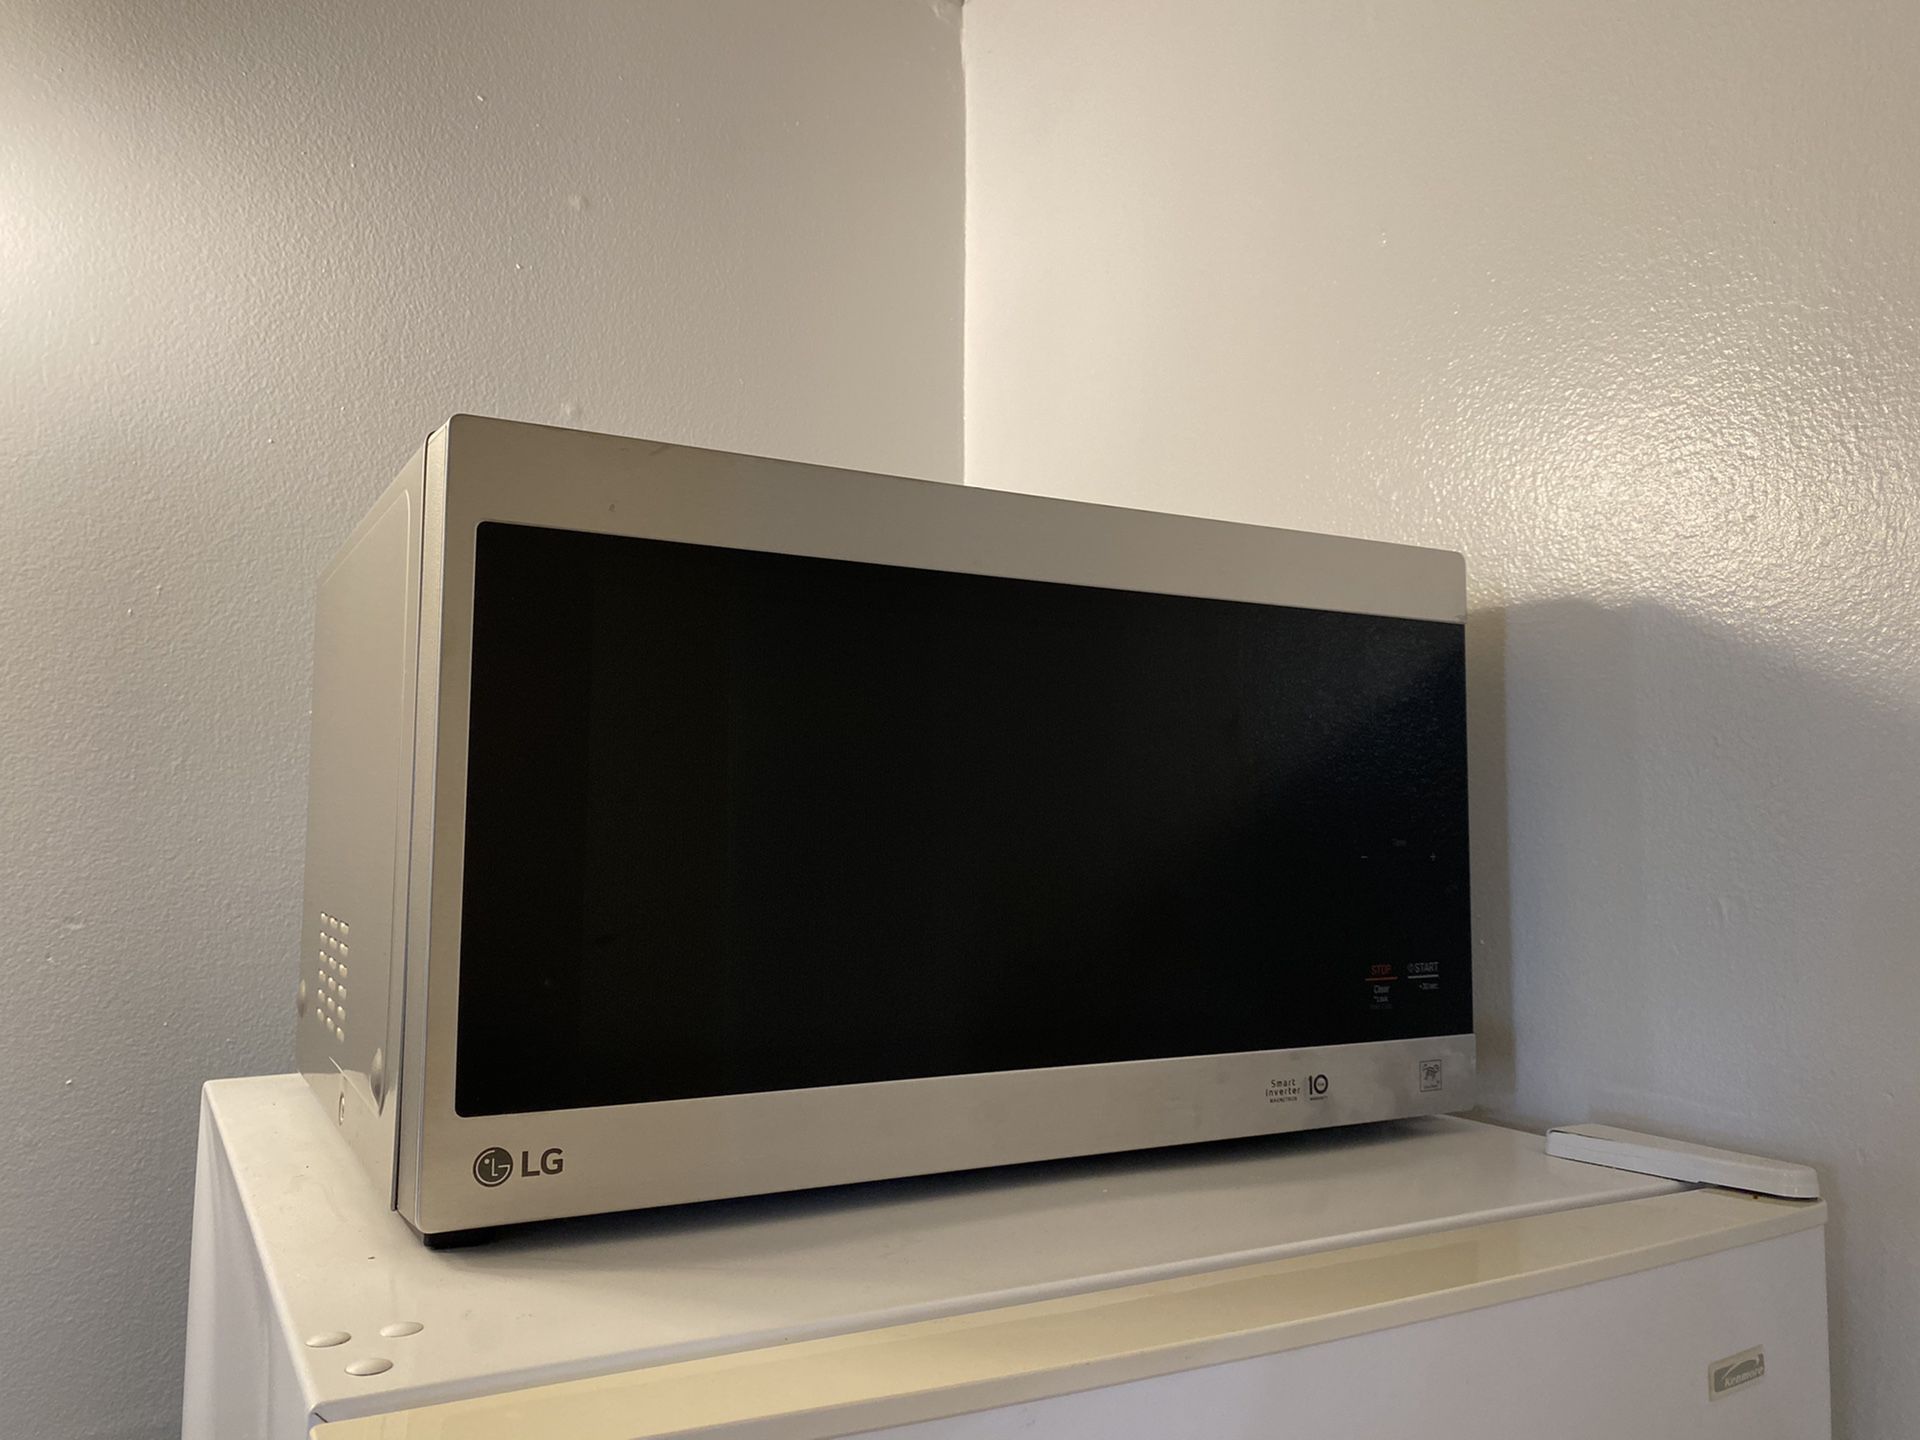 Almost new LG - NeoChef 1.5 Cu. Ft. Mid-Size Microwave